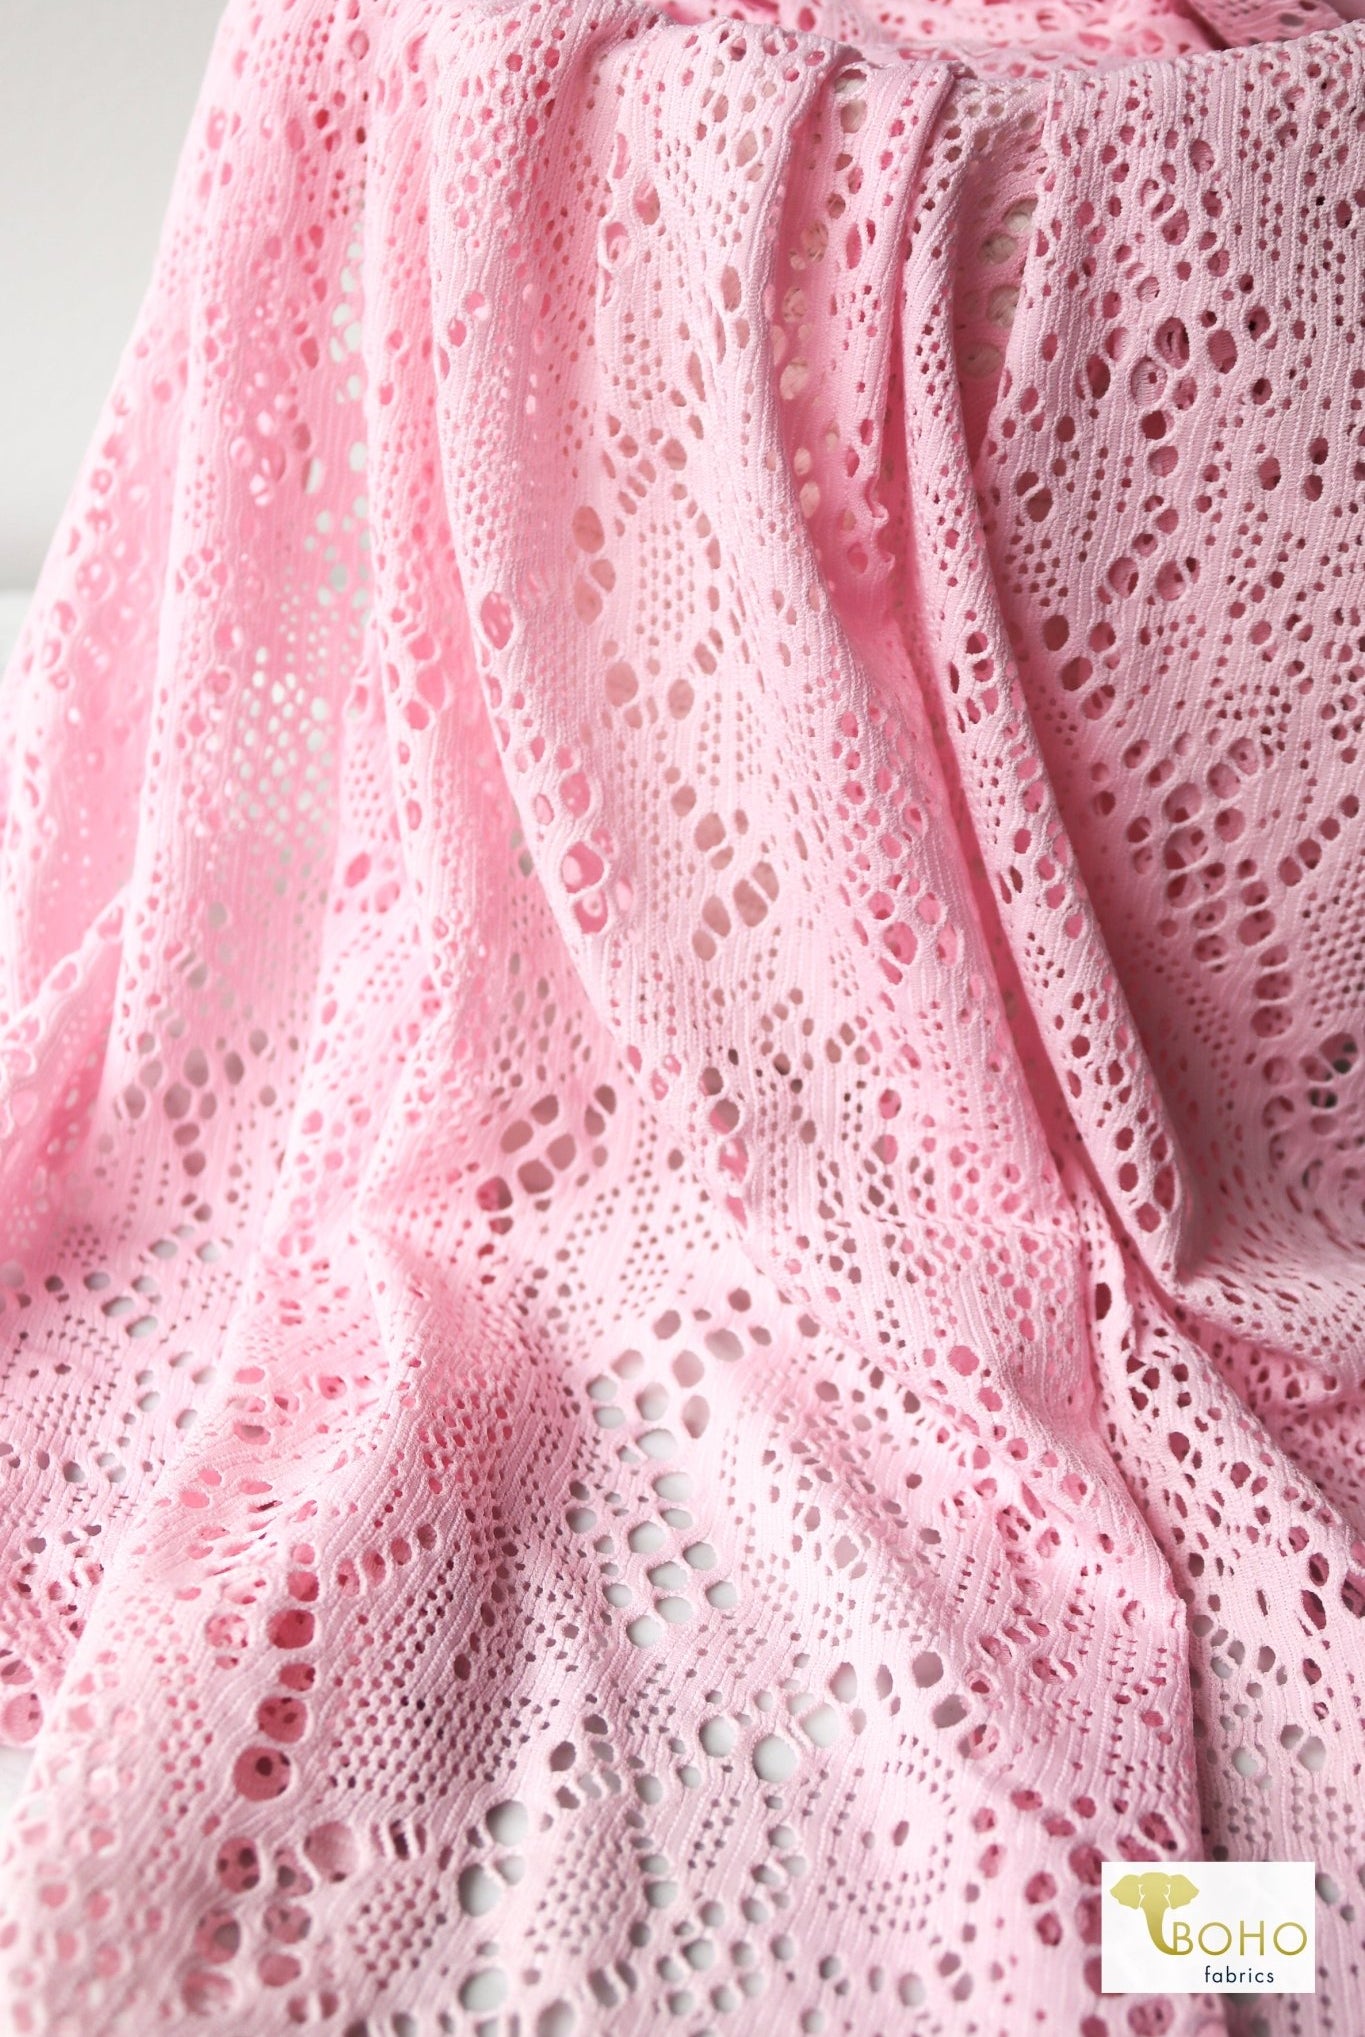 Cresendo in Light Pink, Stretch Lace Fabric - Boho Fabrics - Stretch Lace Fabric